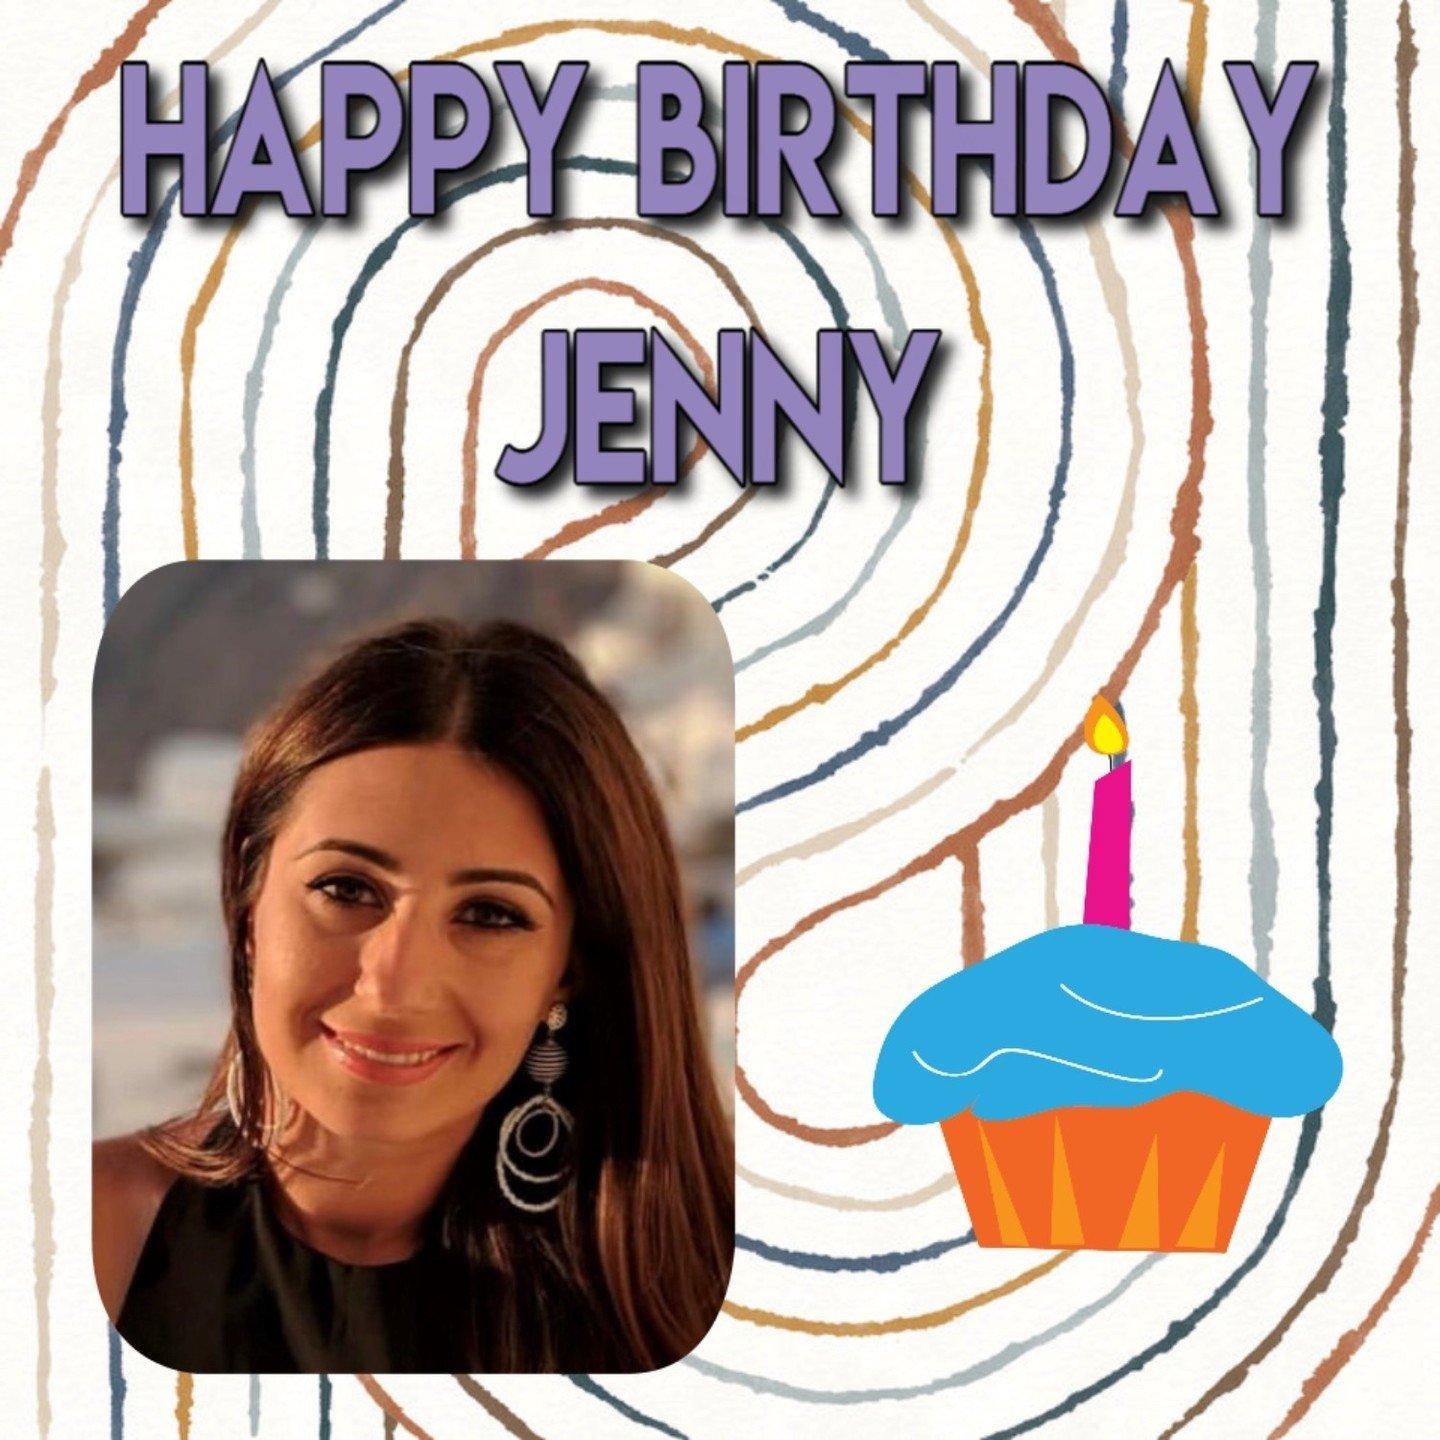 Today is Jenny's day - HAPPY BIRTHDAY!⁠
❤️⁠
We love you!⁠